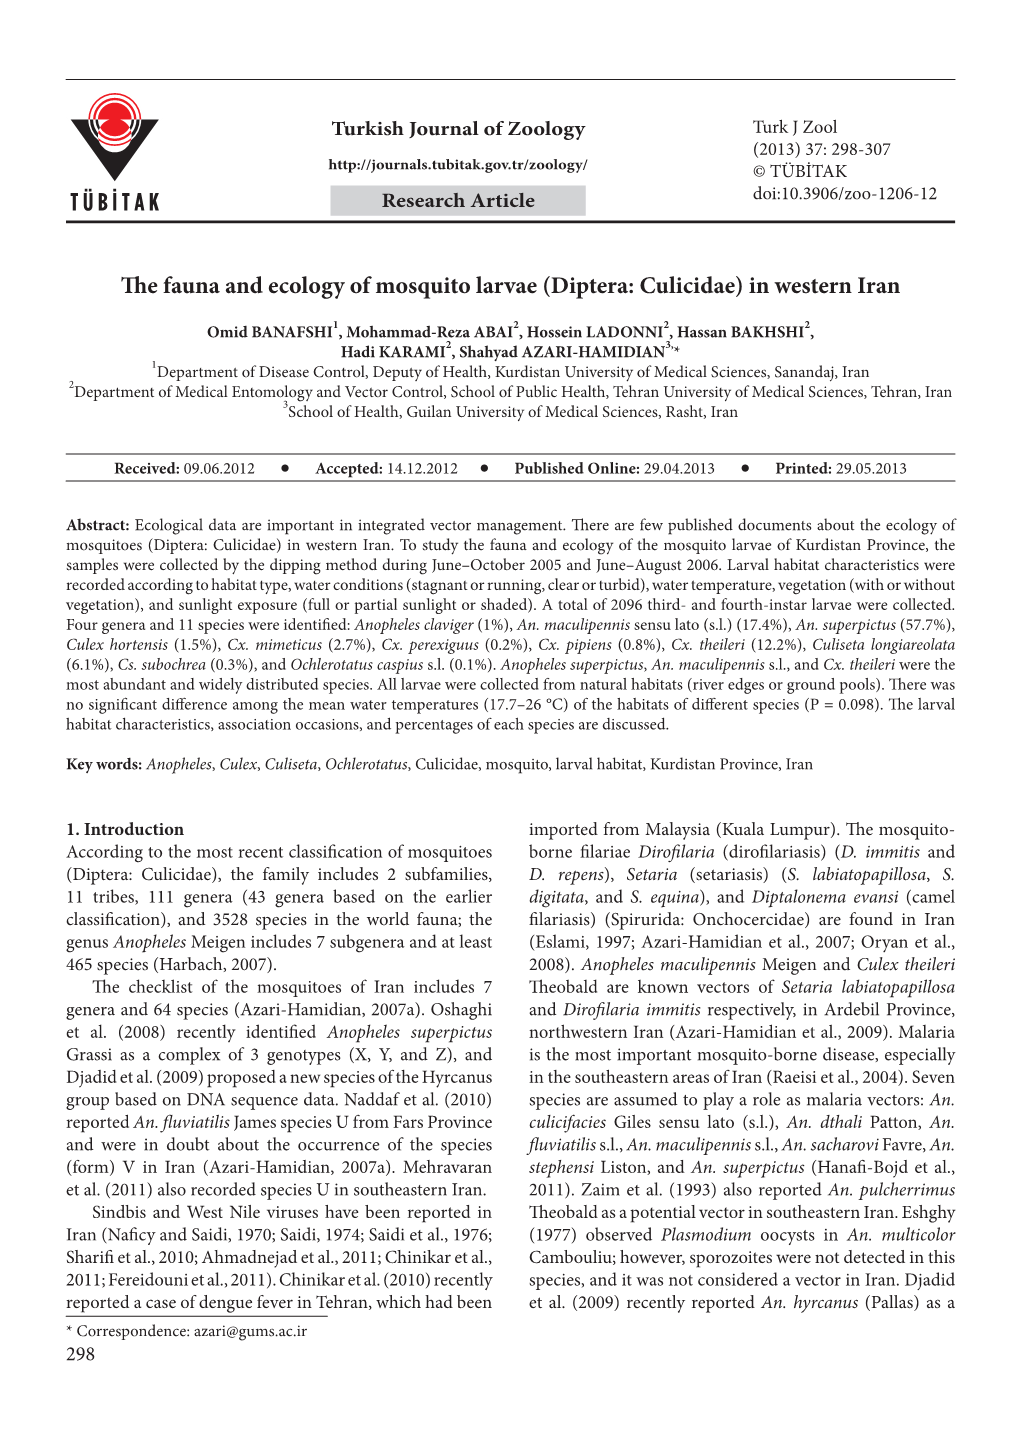 The Fauna and Ecology of Mosquito Larvae (Diptera: Culicidae) in Western Iran